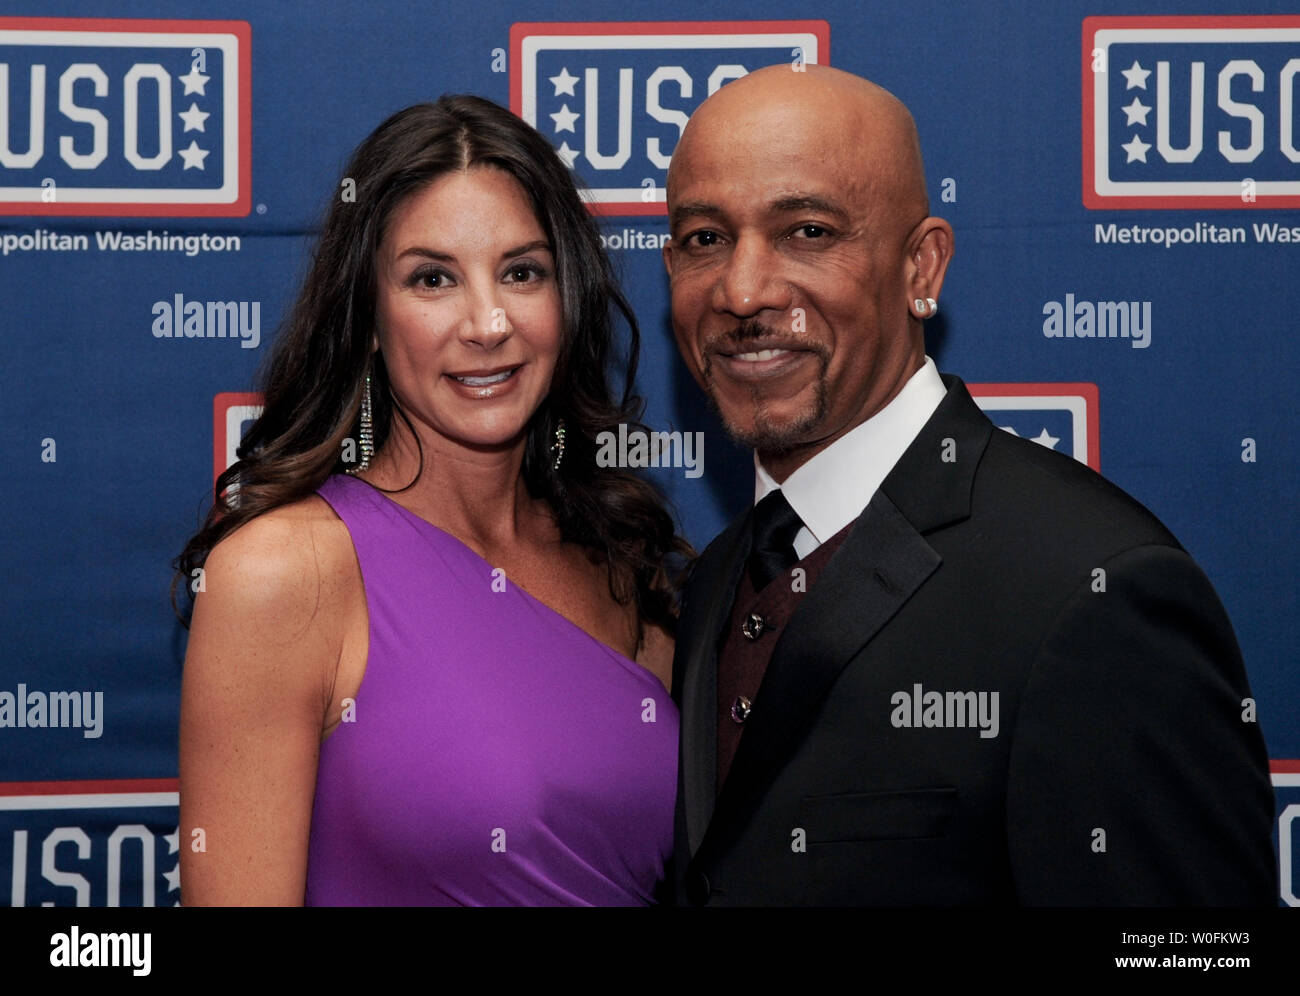 Montel Williams and his wife Tara Fowler attends the USO 28th Annual Awards Dinner in Arlington, Virginia on April 14, 2010. UPI/Alexis C. Glenn Stock Photo